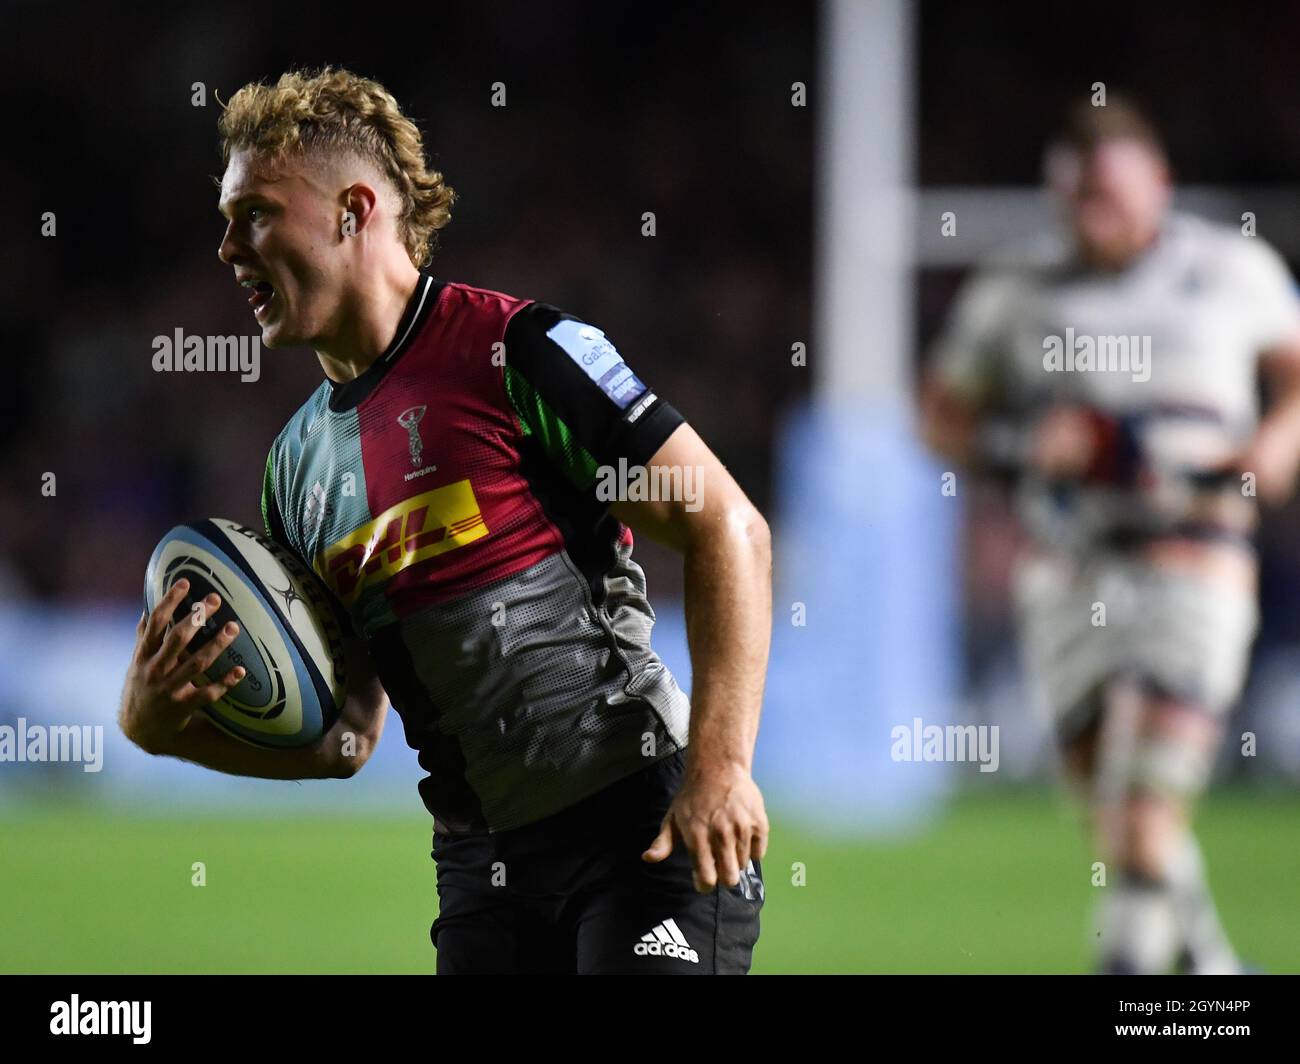 Twickenham Stoop Stadium, UK, UK. 8th October, 2021. Harlequins' Louis Lynagh scores his sides second try during the Gallagher English Premiership game between Harlequins and Bristol Bears: Credit: Ashley Western/Alamy Live News Stock Photo